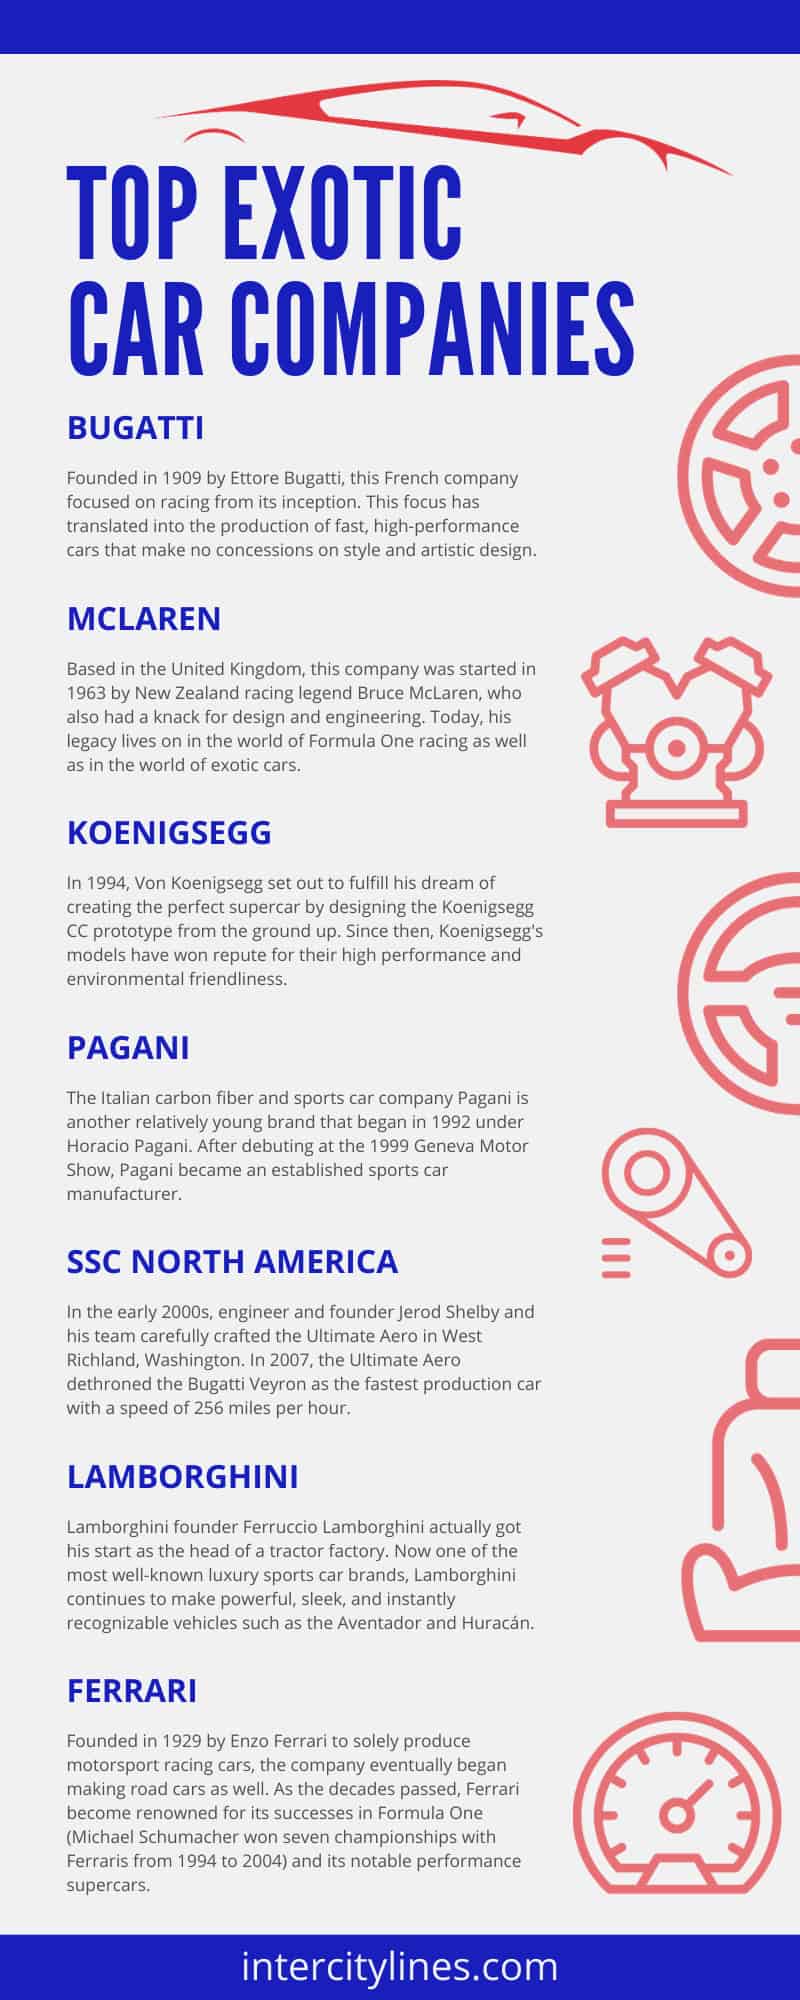 Top Exotic Car Companies infographic